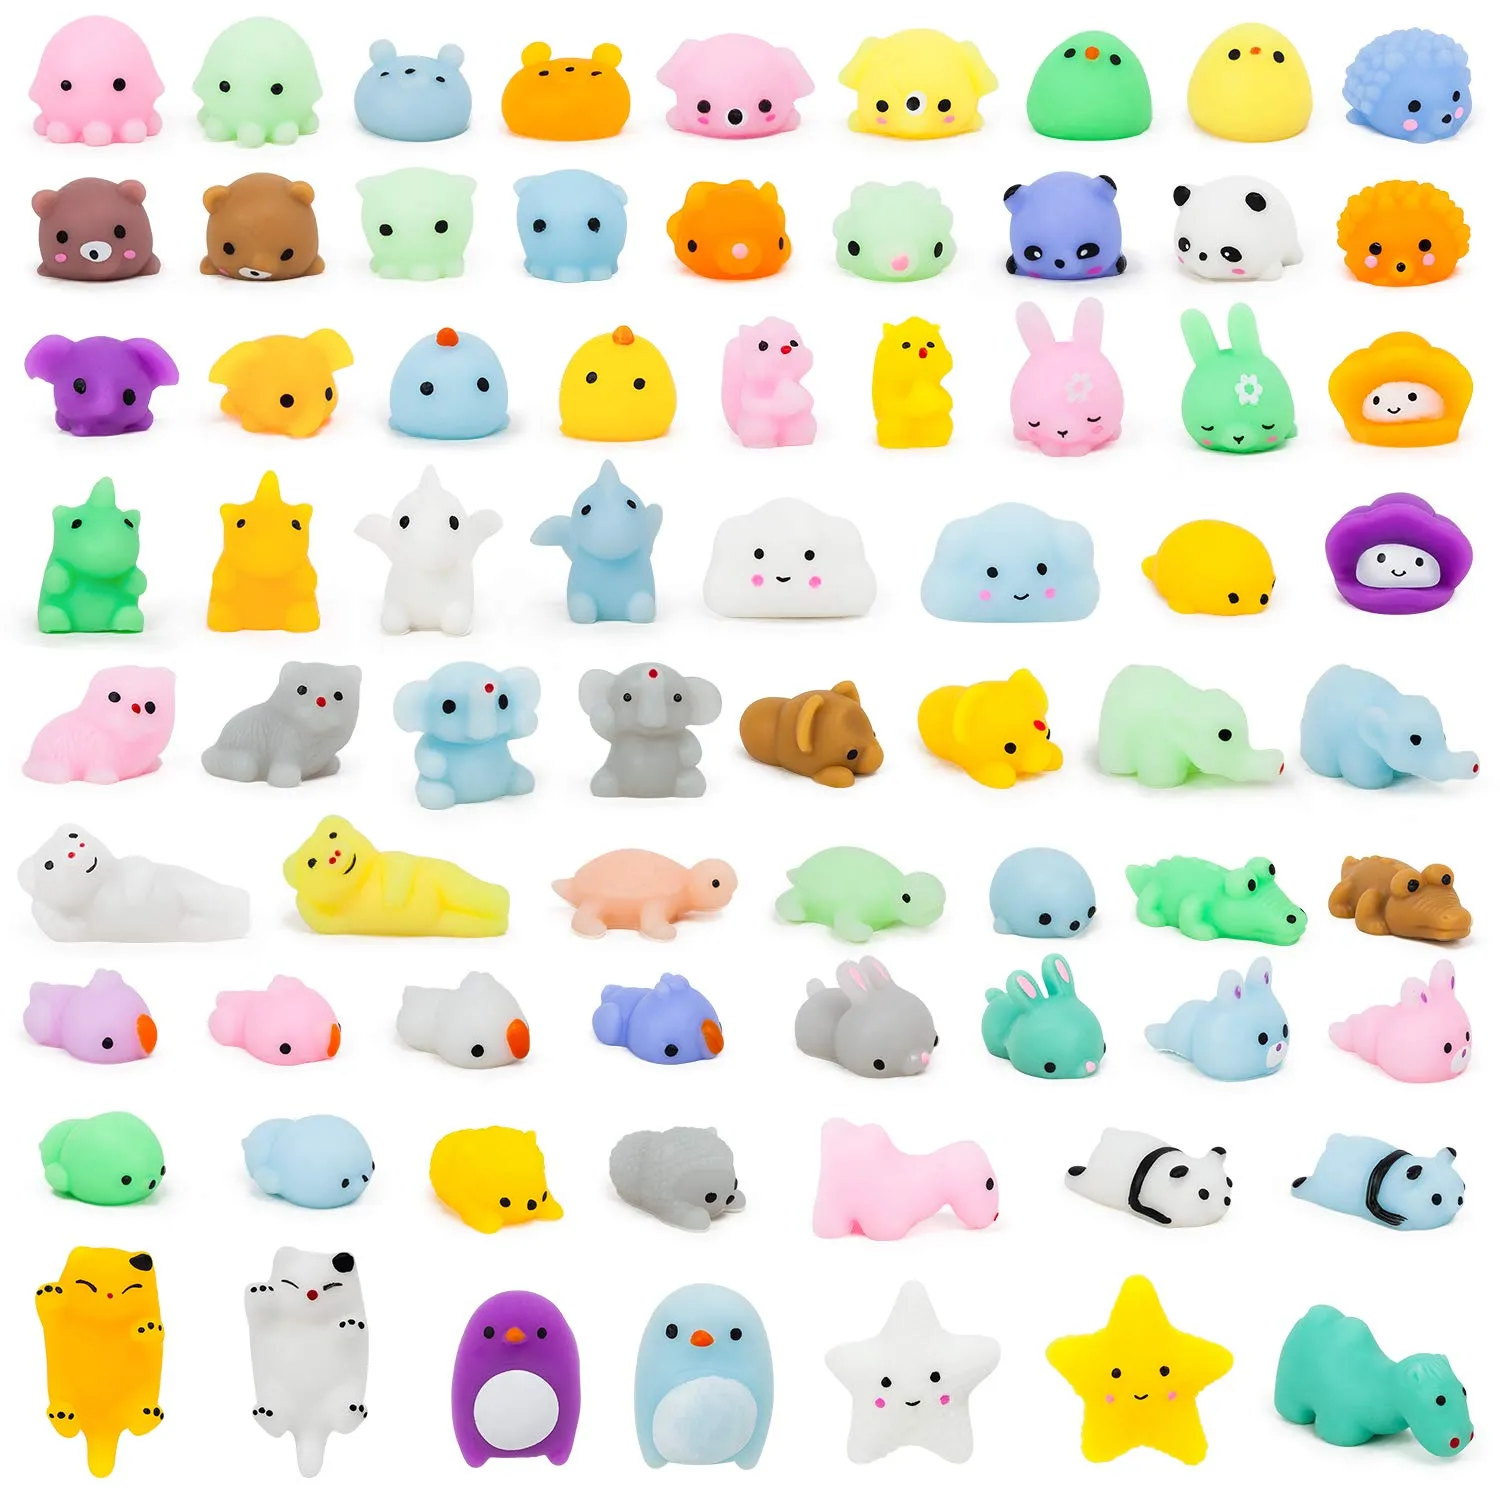 Kawaii Mochi Squishy Toys Soft Fidget Squeeze Polar Bear Cartoon Cat  Animals For Sensory Anti Stress Relief Perfect Birthday, Easter, Christmas  Gifts For Kids And Adults From Begreattoys, $0.36